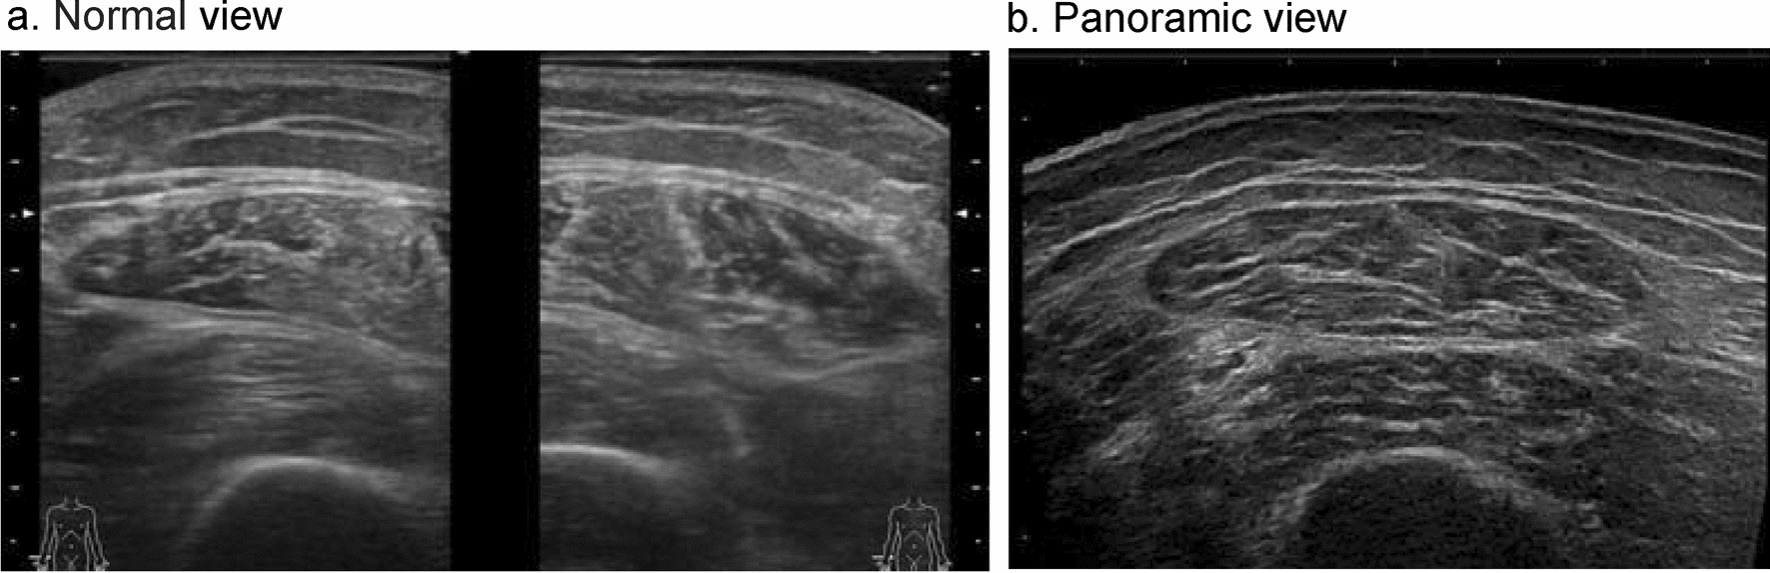 Acute muscle loss assessed using panoramic ultrasound in critically ill adults: a prospective observational study